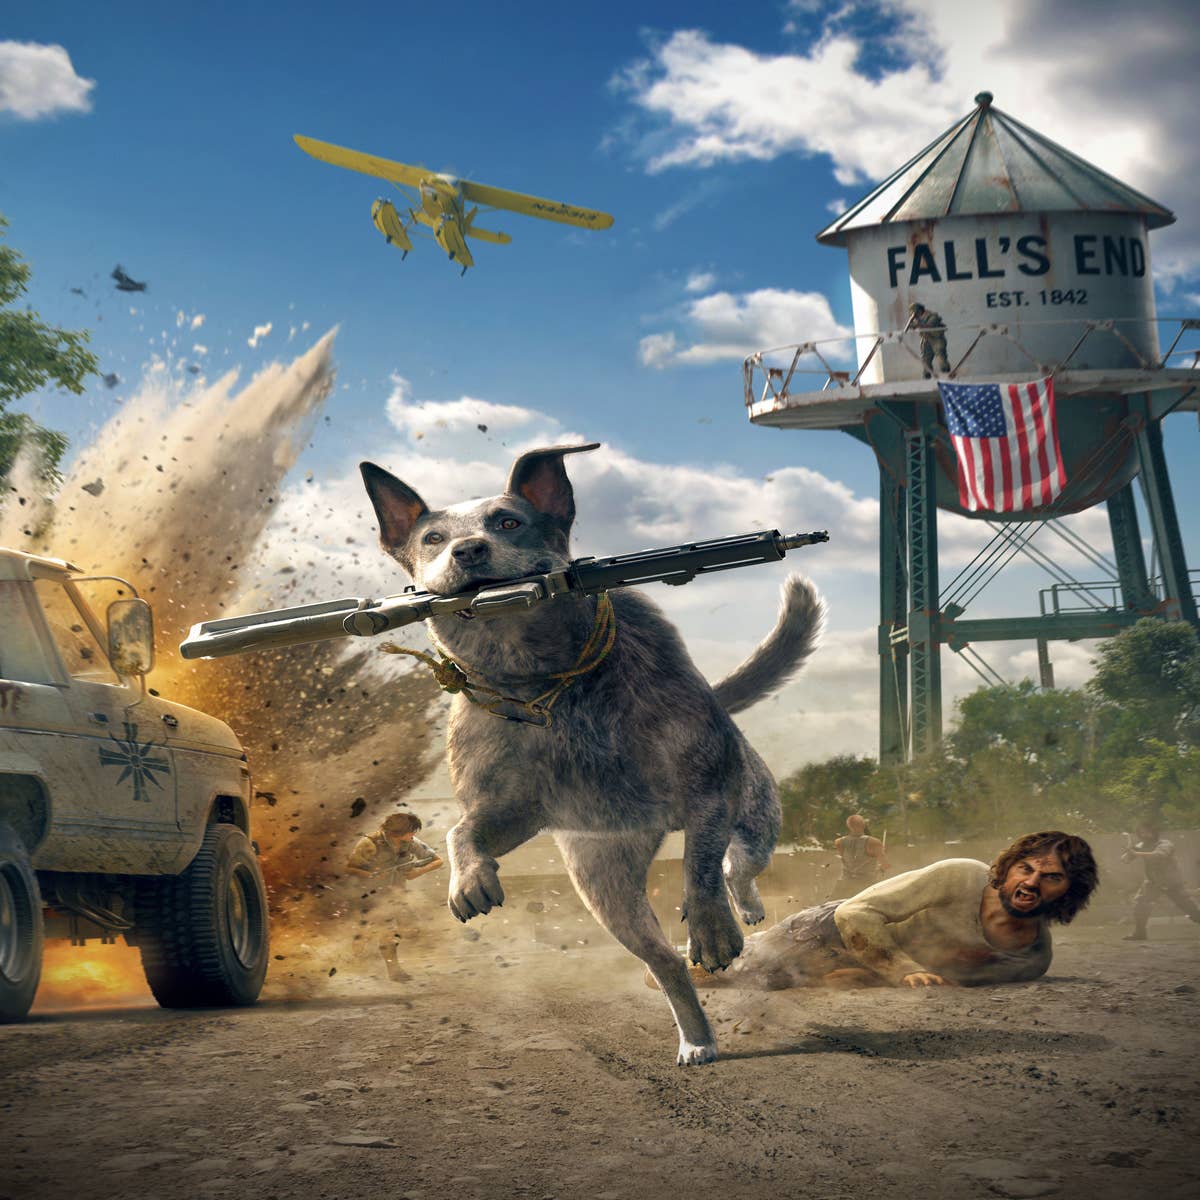 Xbox One X allows for Far Cry 5 to run at native 4K